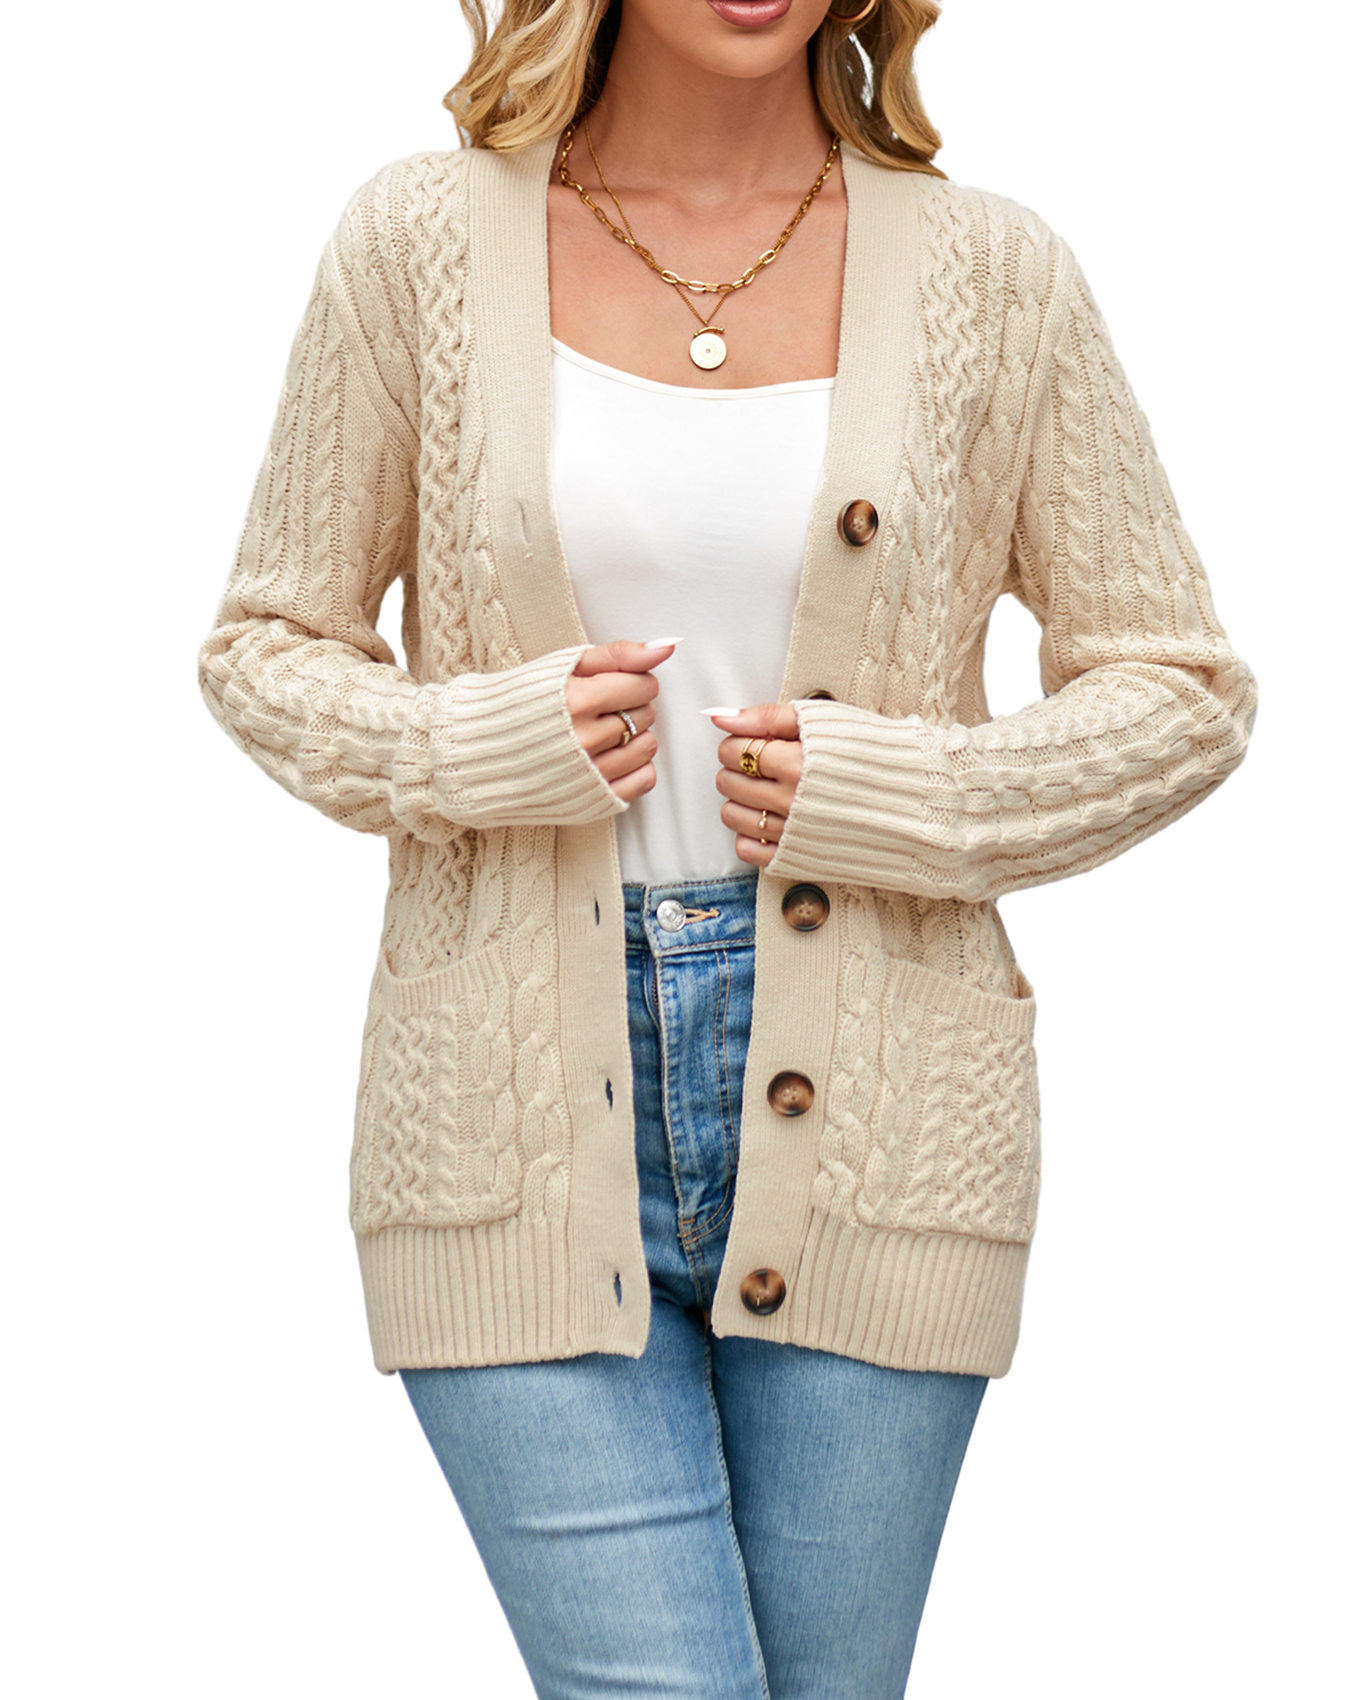 Uuszgmr Autumn And Cardigan For Women Ladies Heavy Needle Sweater Solid ...